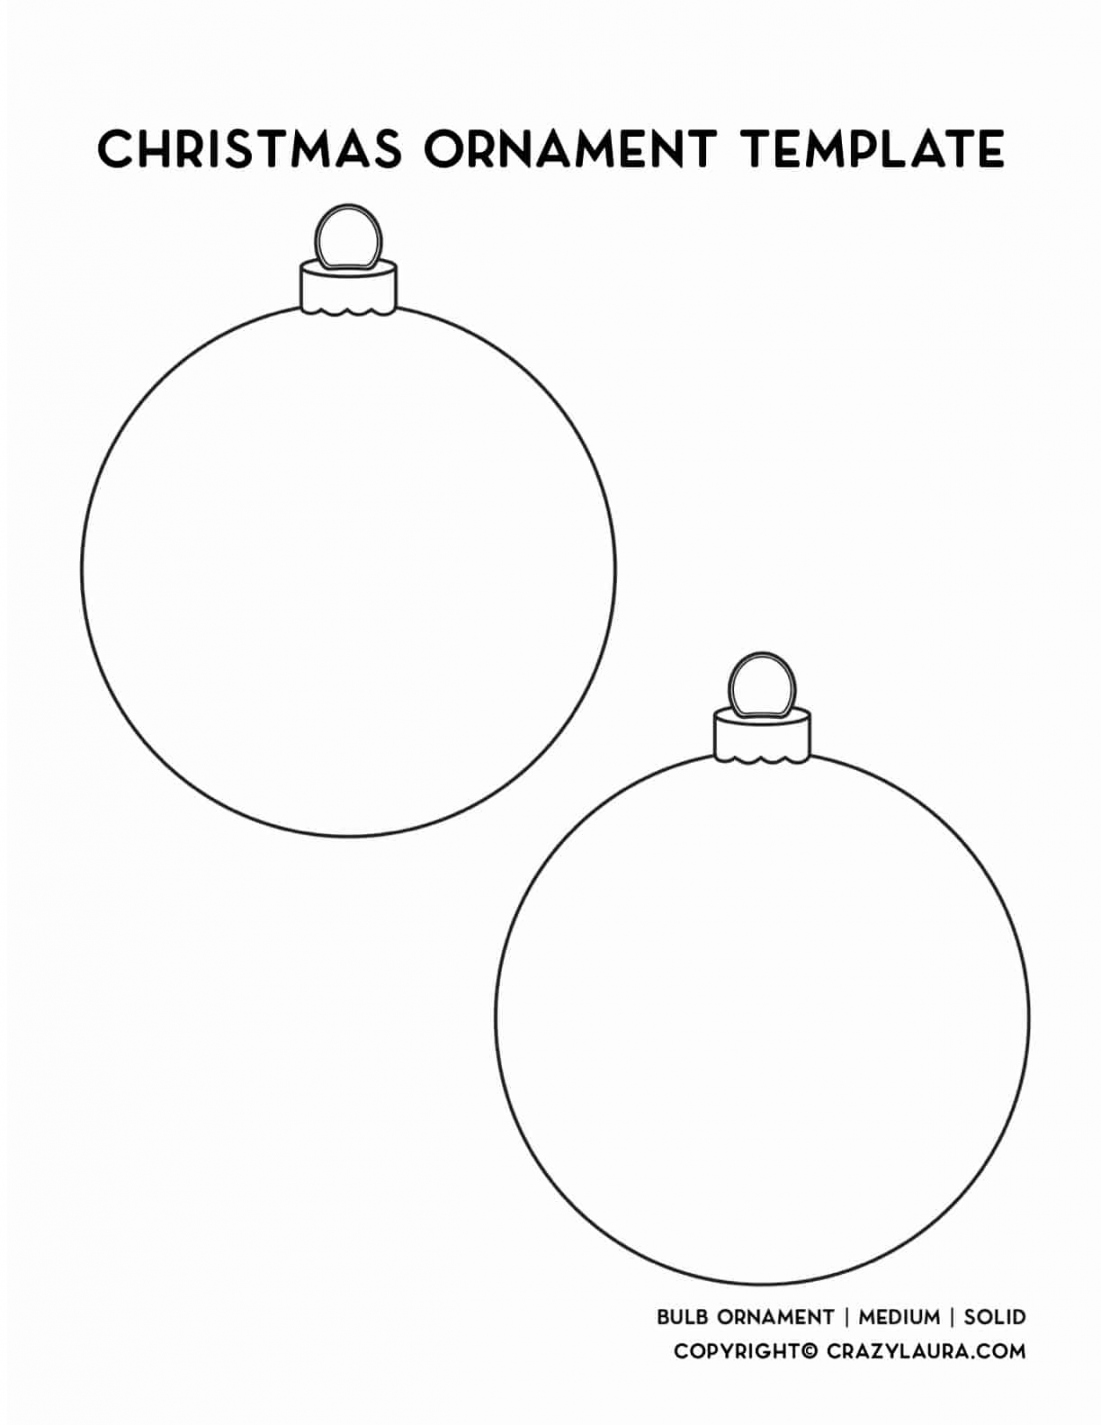 Free Christmas Ornament Template Printables & Outlines - Crazy Laura - FREE Printables - Christmas Ornaments Template